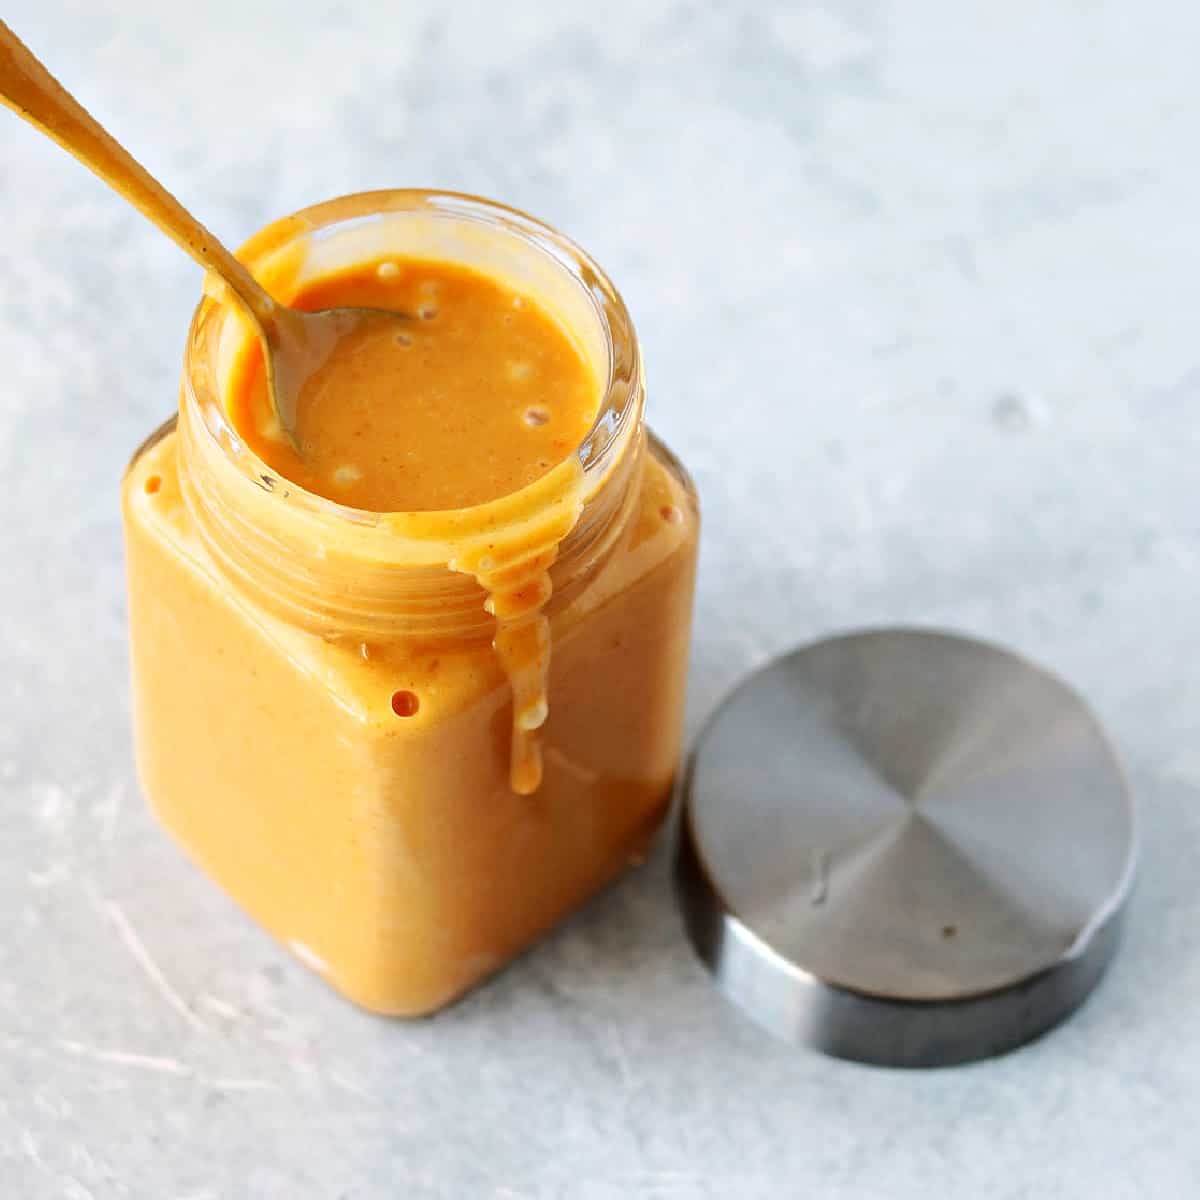 chick-fil-a sauce recipe in a glass jar with a spoon